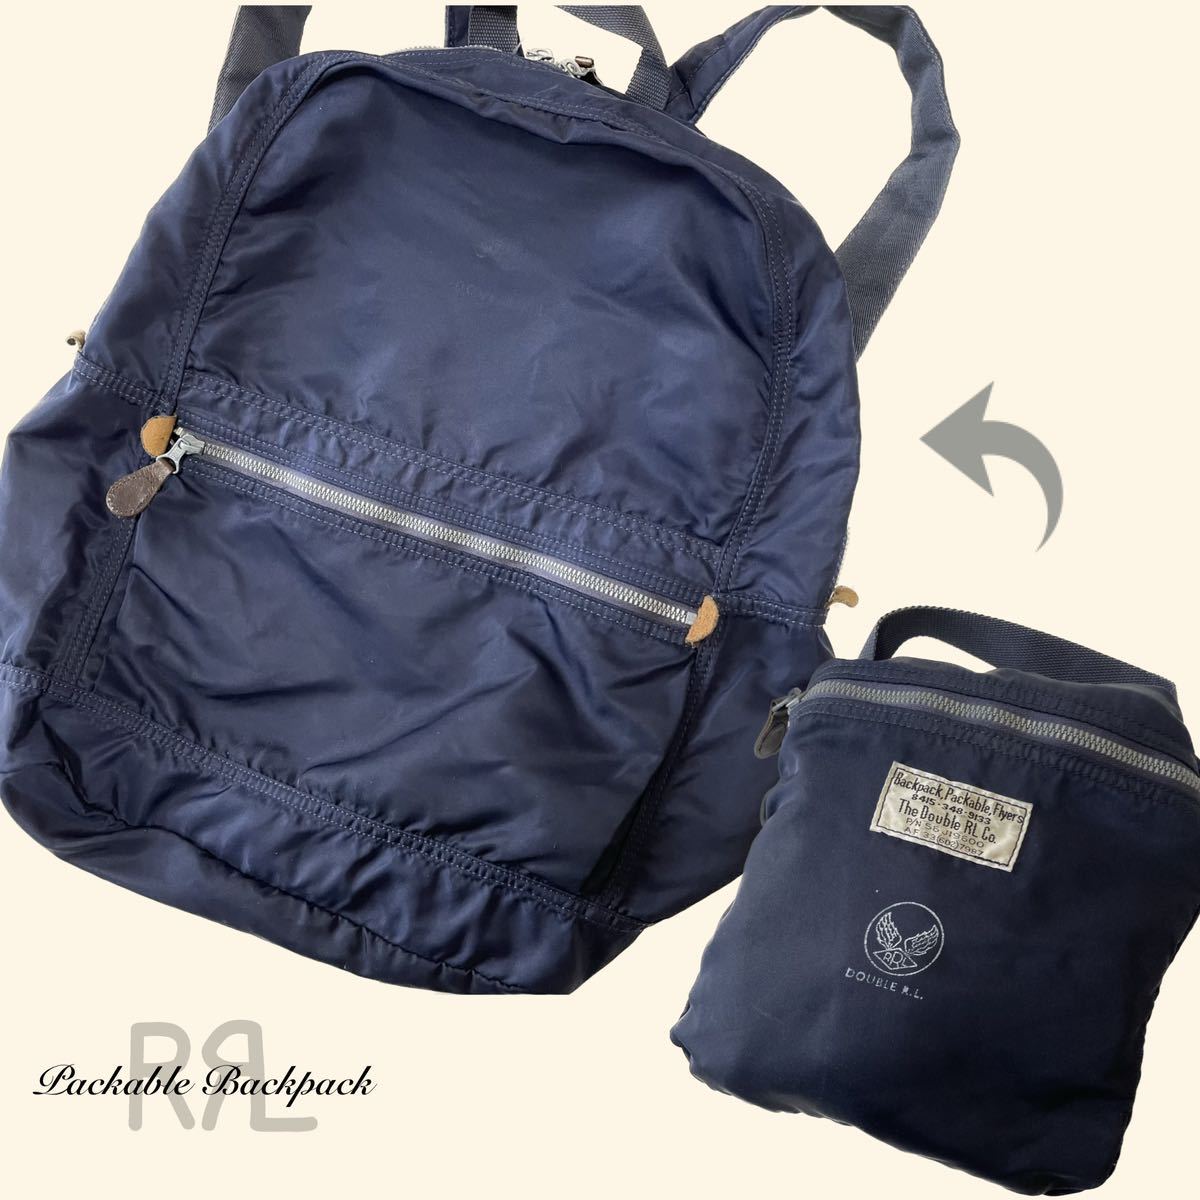 RRL “Packable Flyers Backpack” バックパック リュック バッグ ナイロン ミリタリー パッカブル エコバッグ ヴィンテージ Ralph Lauren